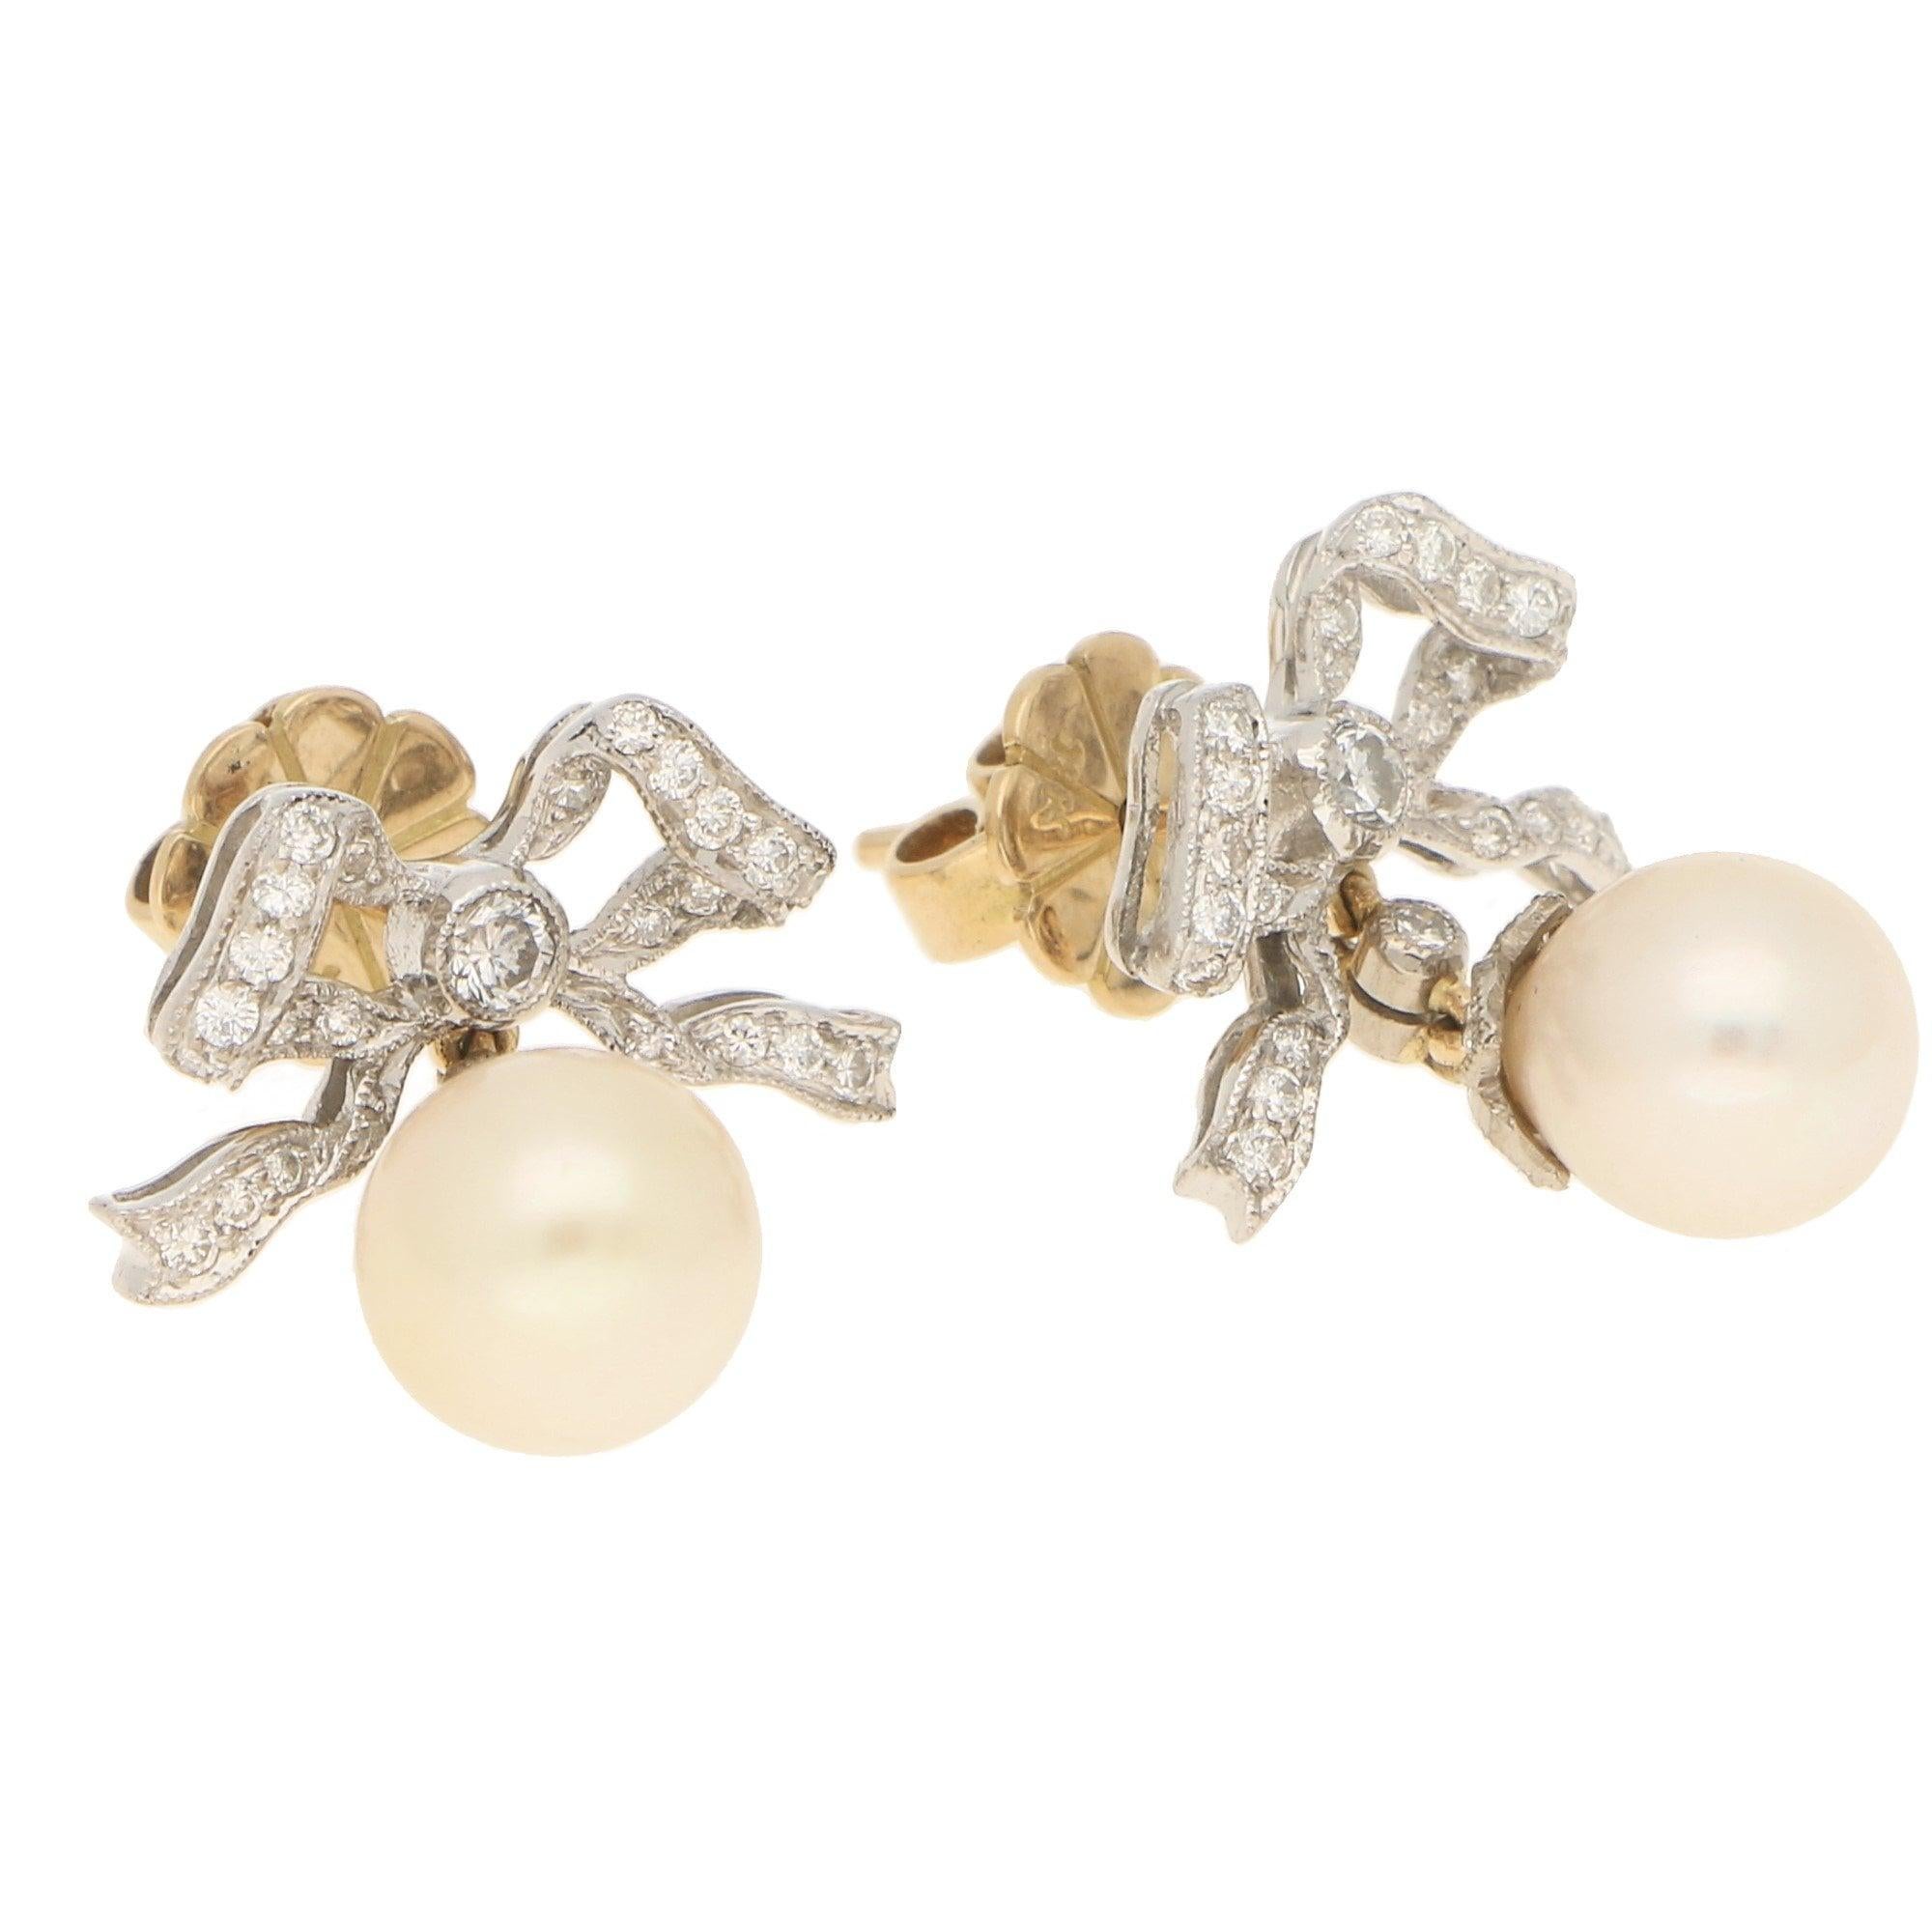 Cultured pearls of a light cream colour, approximately 9mm. Diamonds approximately 0.40 carats in total, F/G colour, VS/SI clarity.
A pair of Belle Epoque style cultured pearl and diamond bow drop earrings in 18-karat white and yellow gold, circa